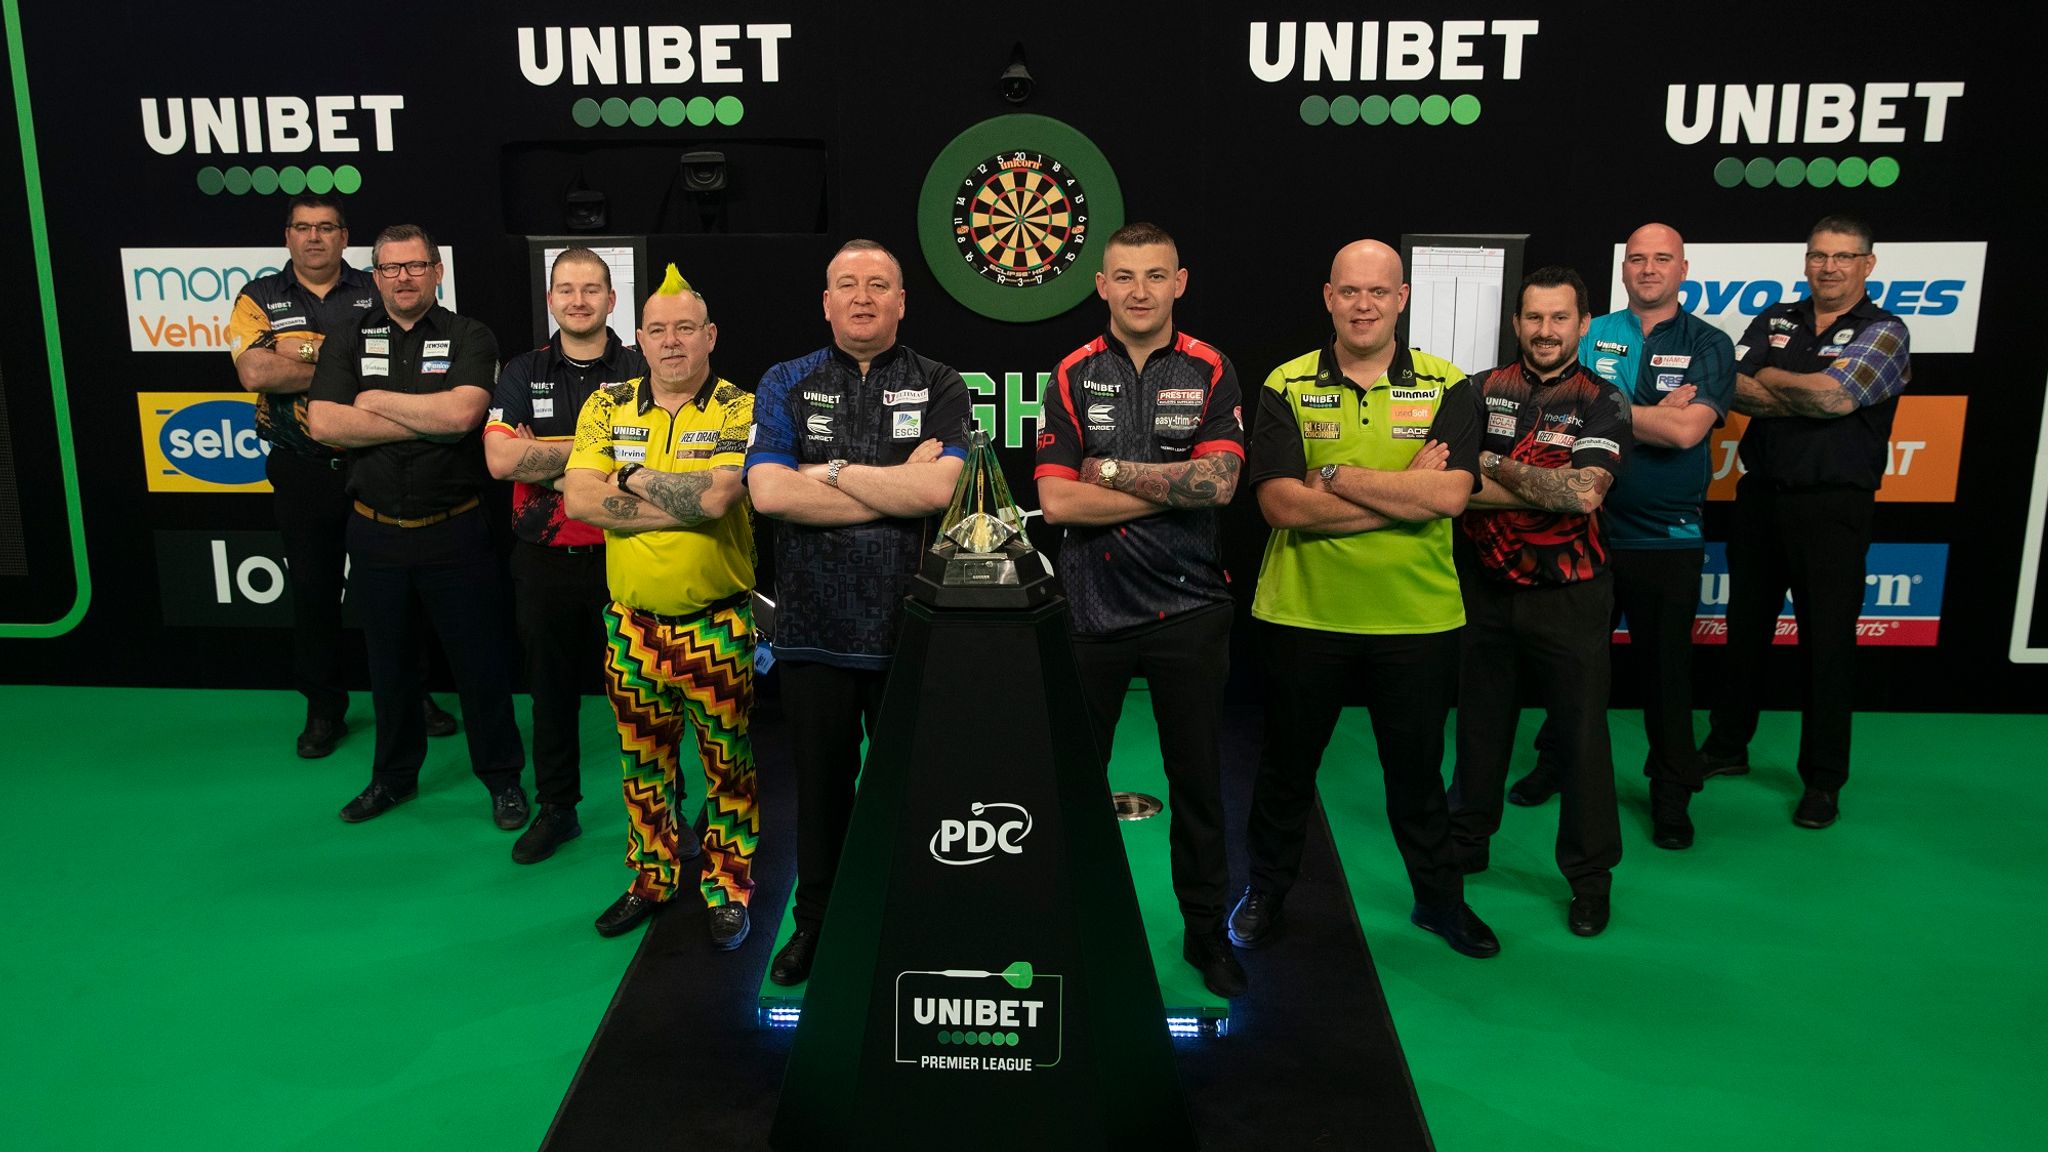 PDC confirms fans will attend Premier League from 24-28 as tournament reaches conclusion | Darts News | Sky